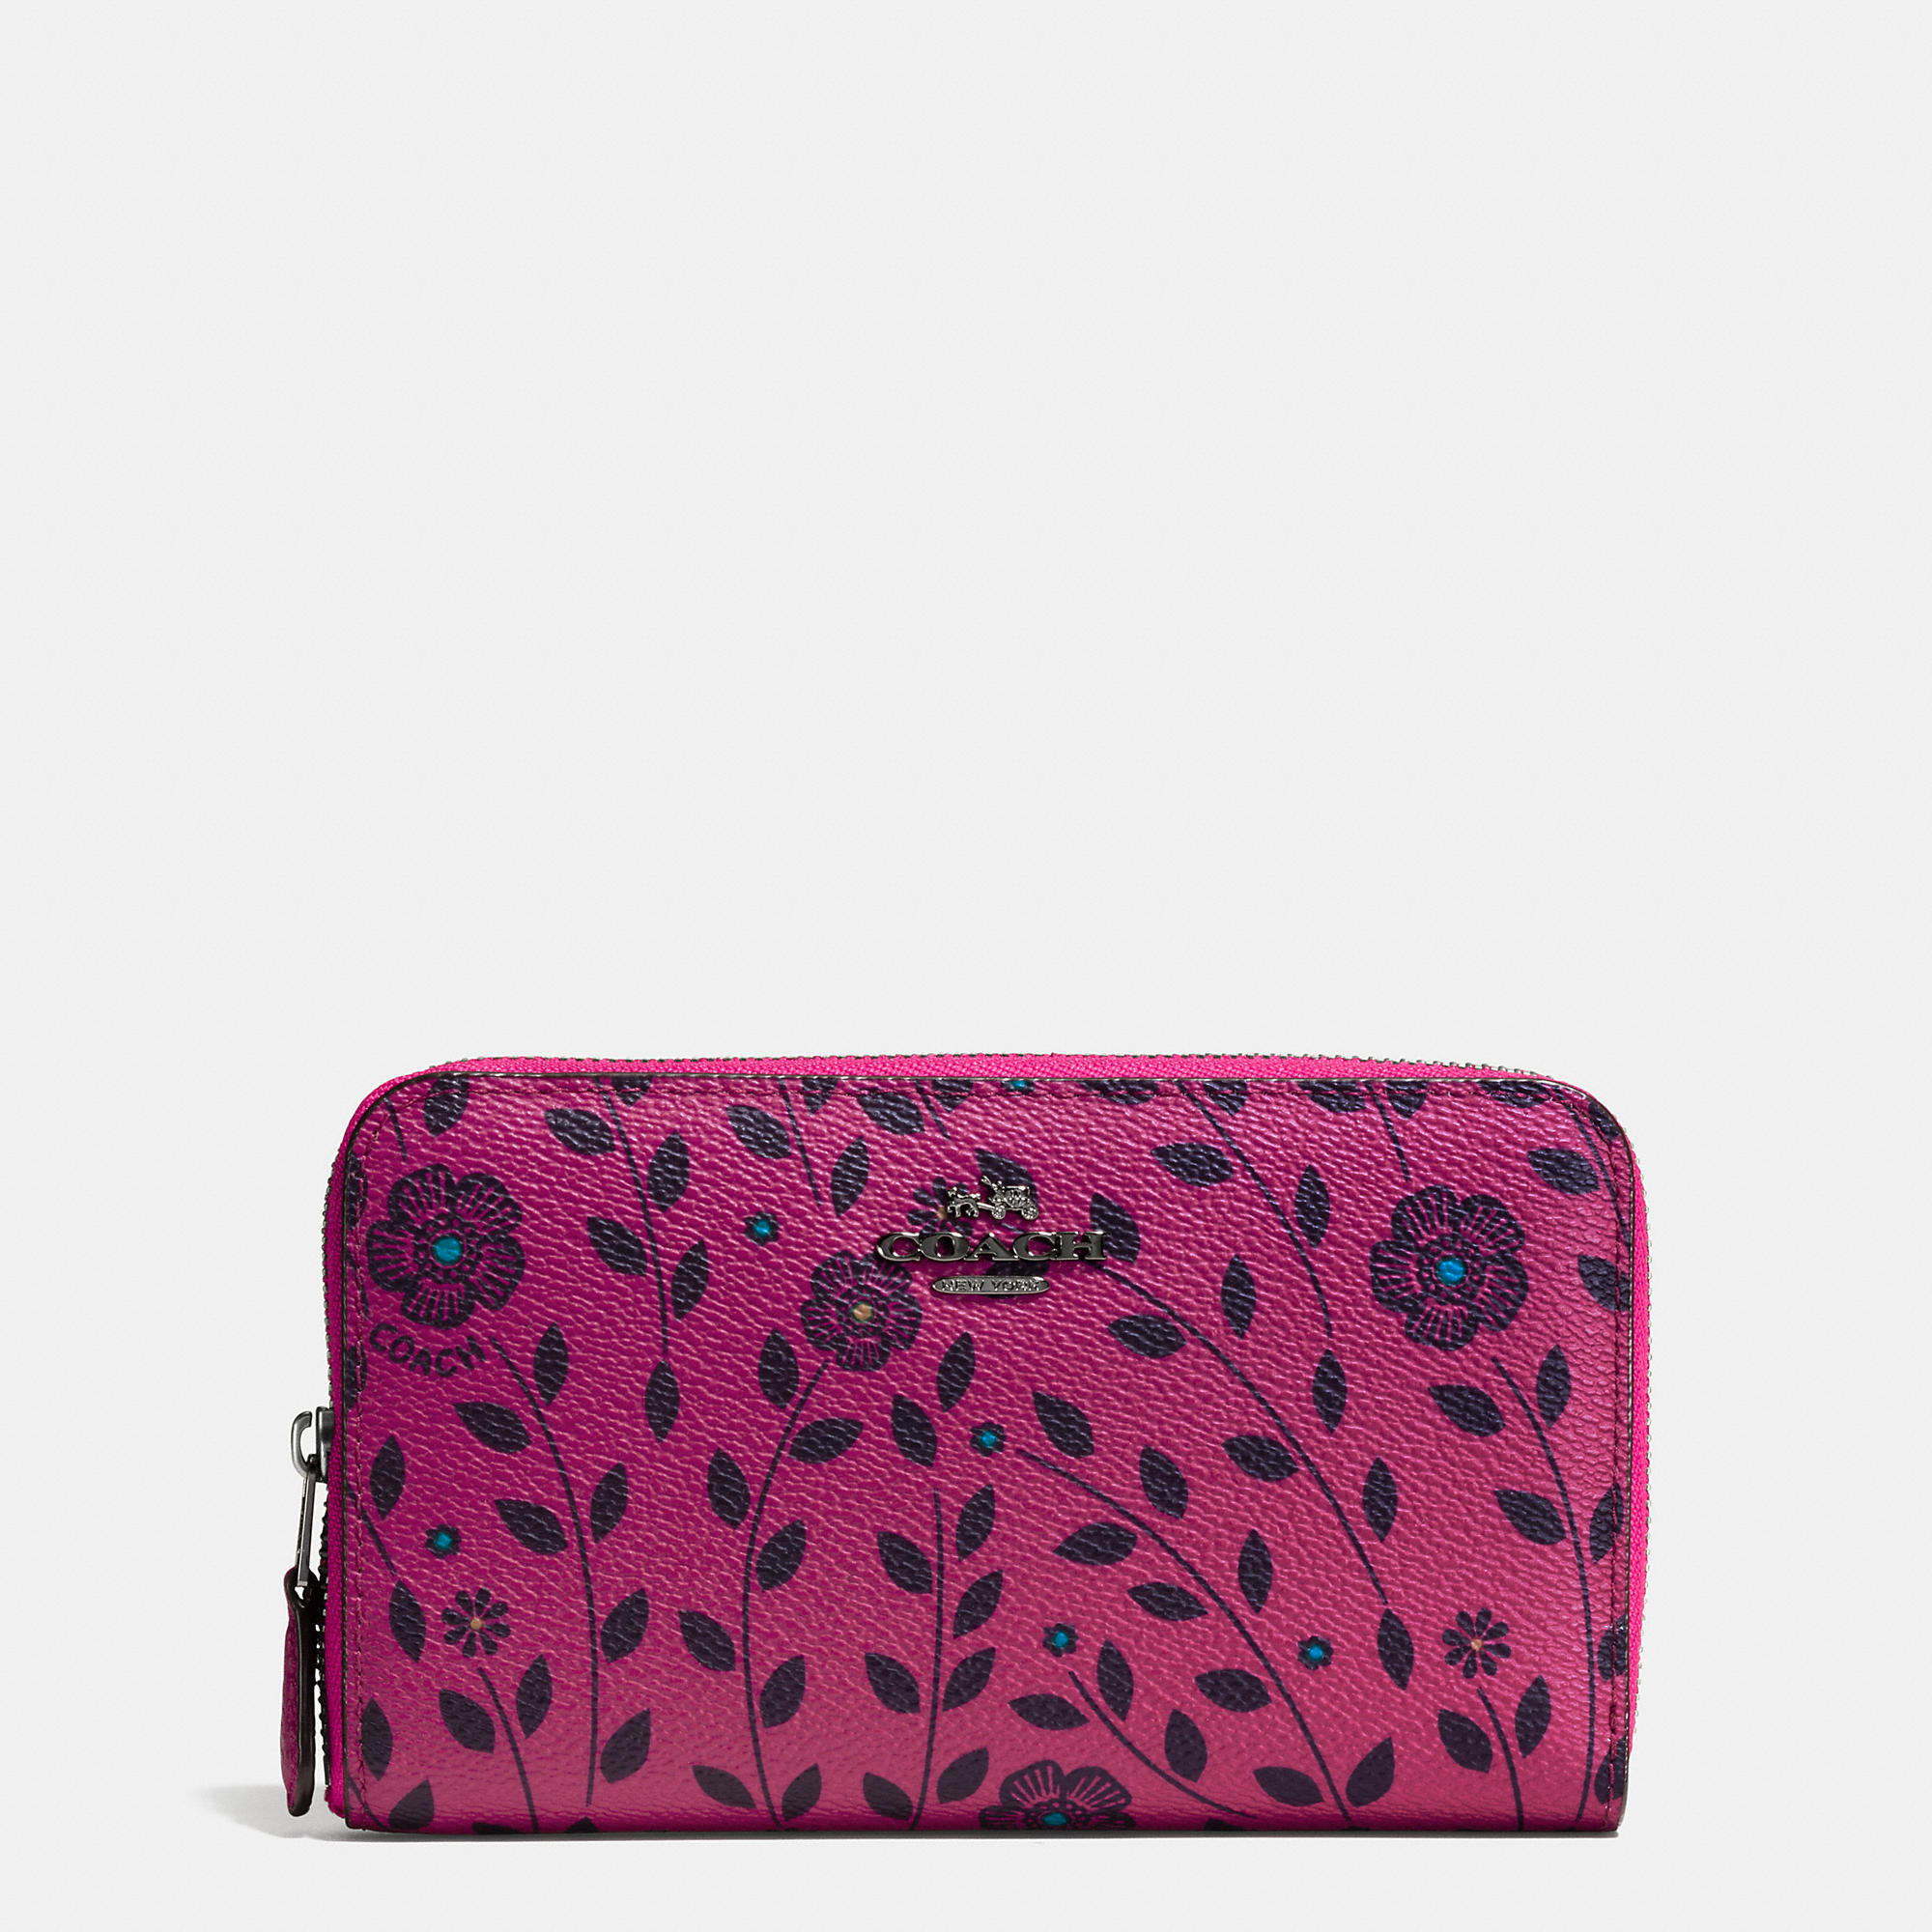 Lyst - COACH Medium Zip Around Wallet In Willow Floral Coated Canvas